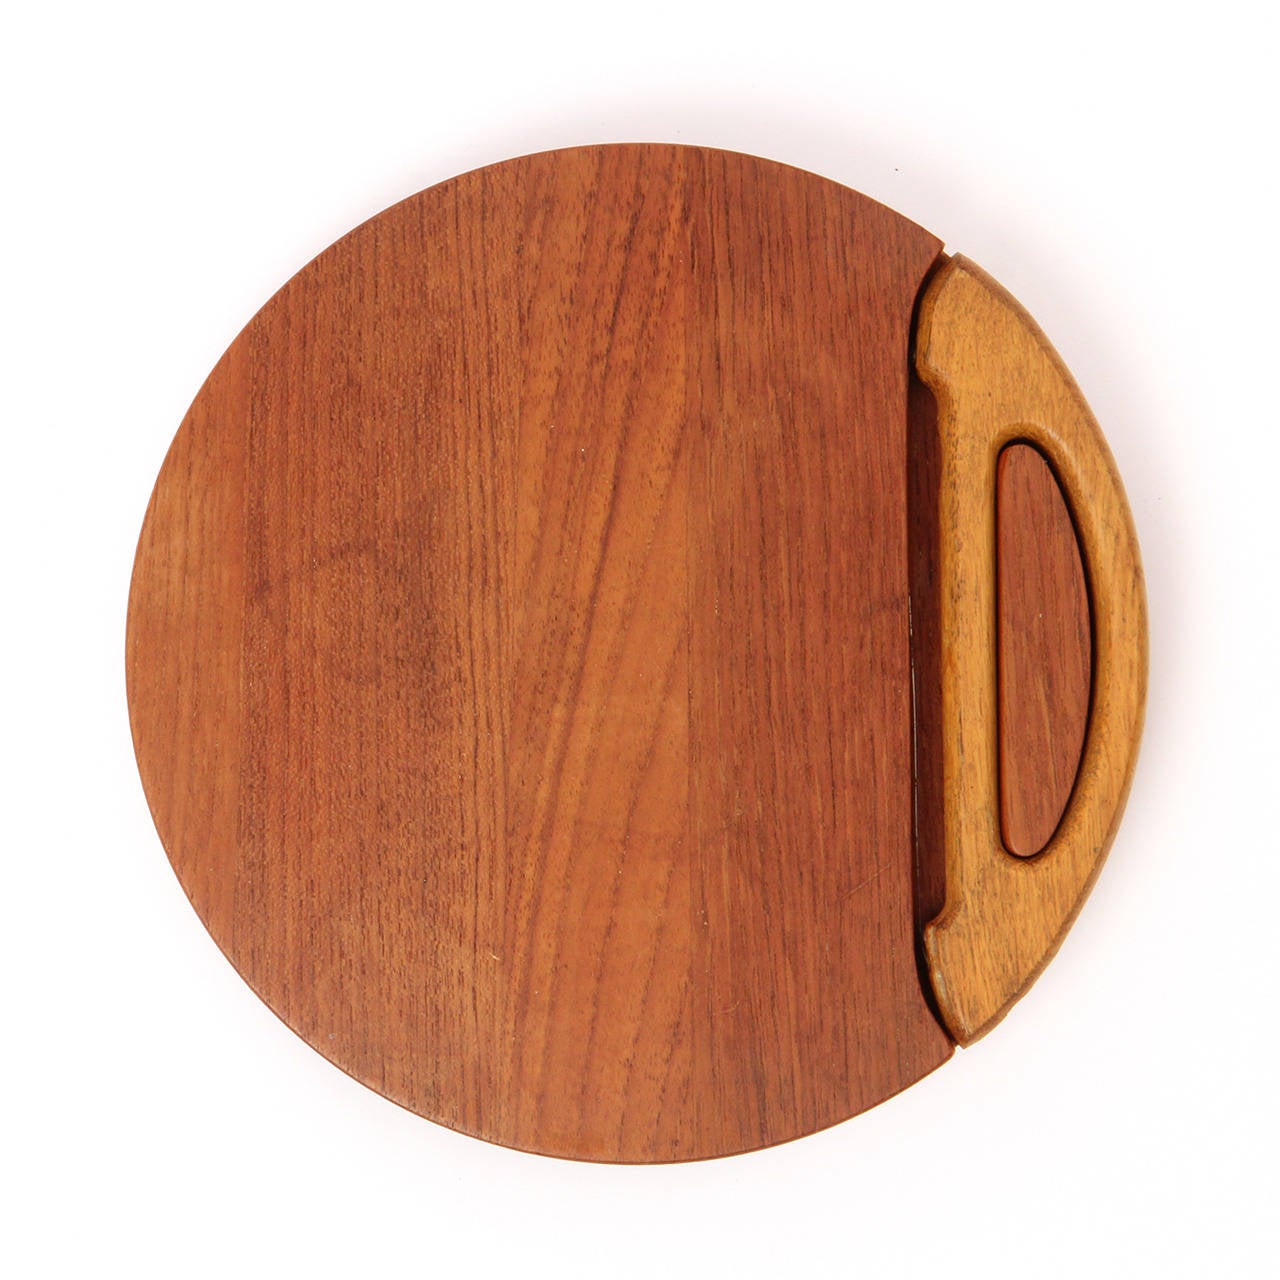 A beautifully crafted and thoughtfully designed cutting board in solid teak having an innovative fitted cheese slicer.